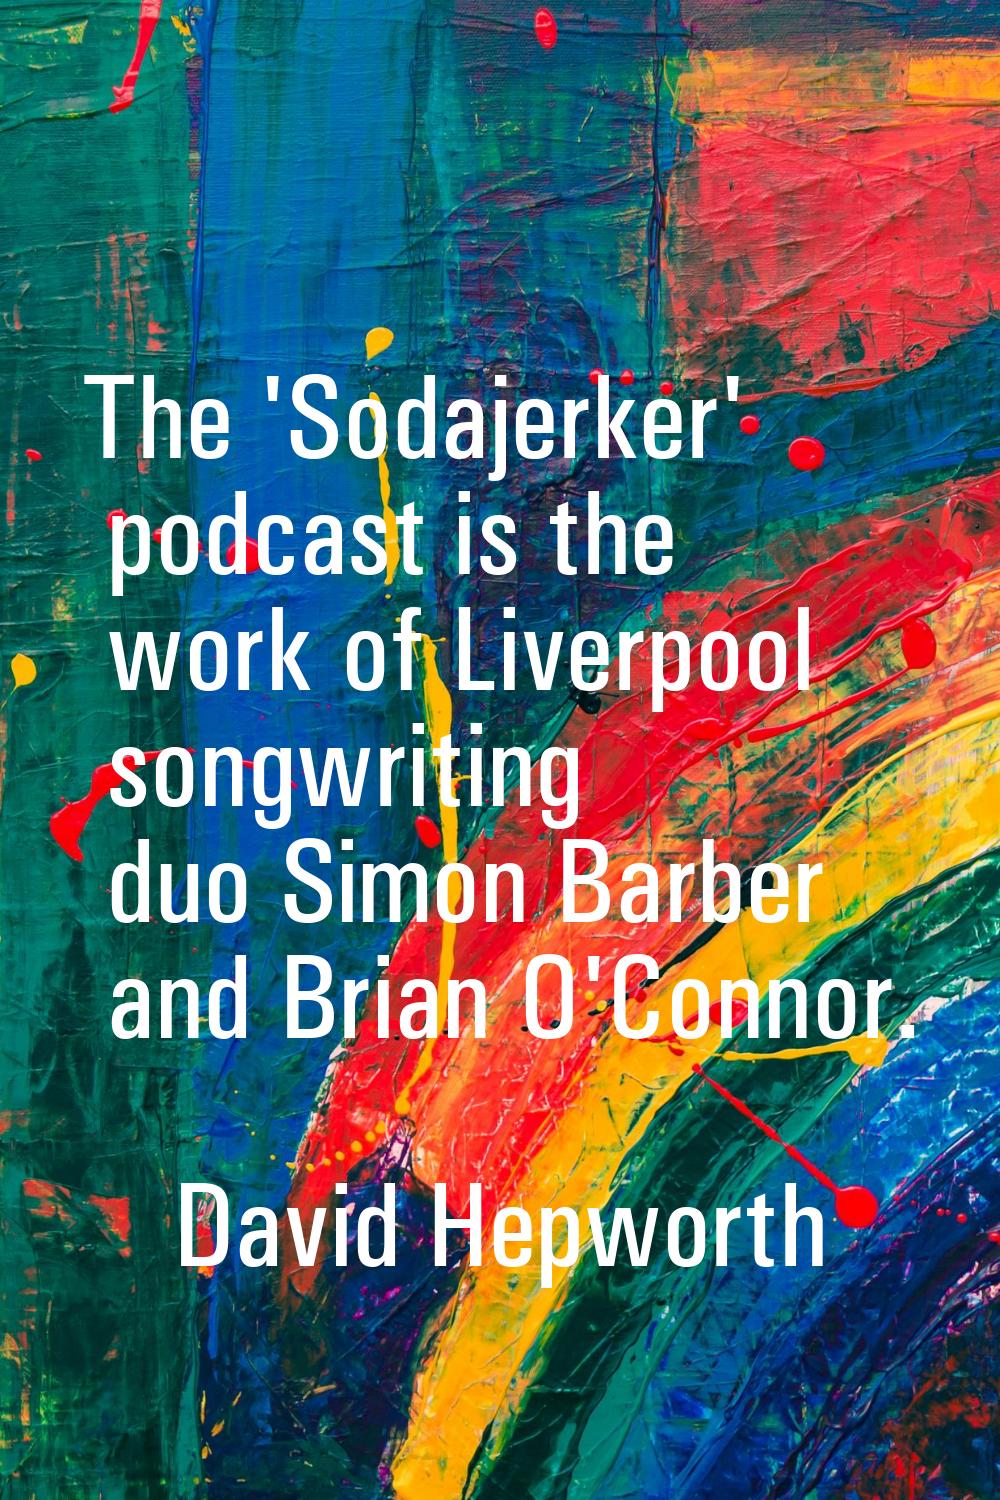 The 'Sodajerker' podcast is the work of Liverpool songwriting duo Simon Barber and Brian O'Connor.